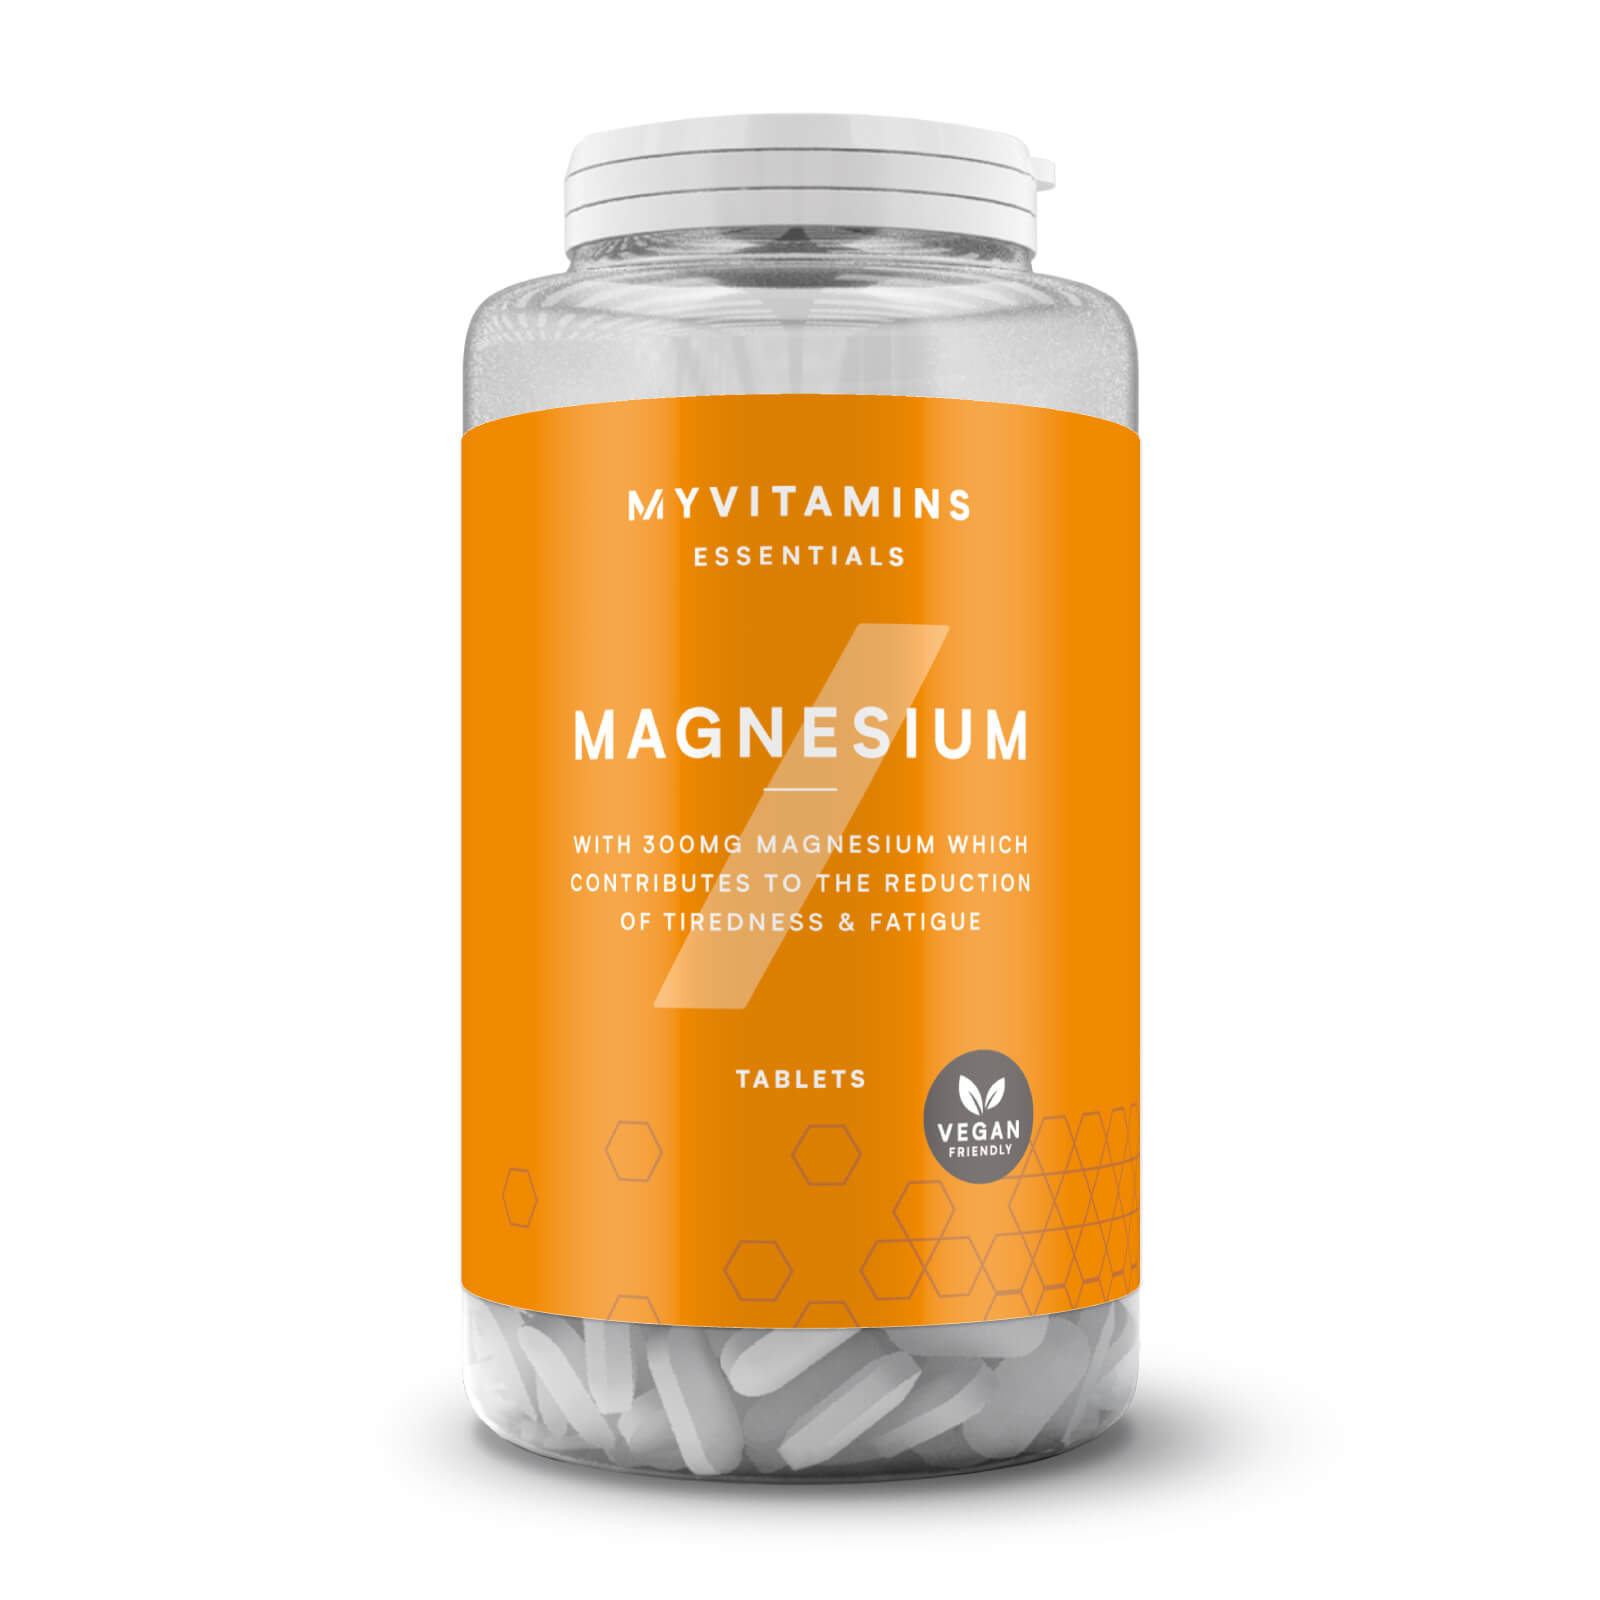 Image of Myvitamins Magnesium - 3 Months (270 Tablets)